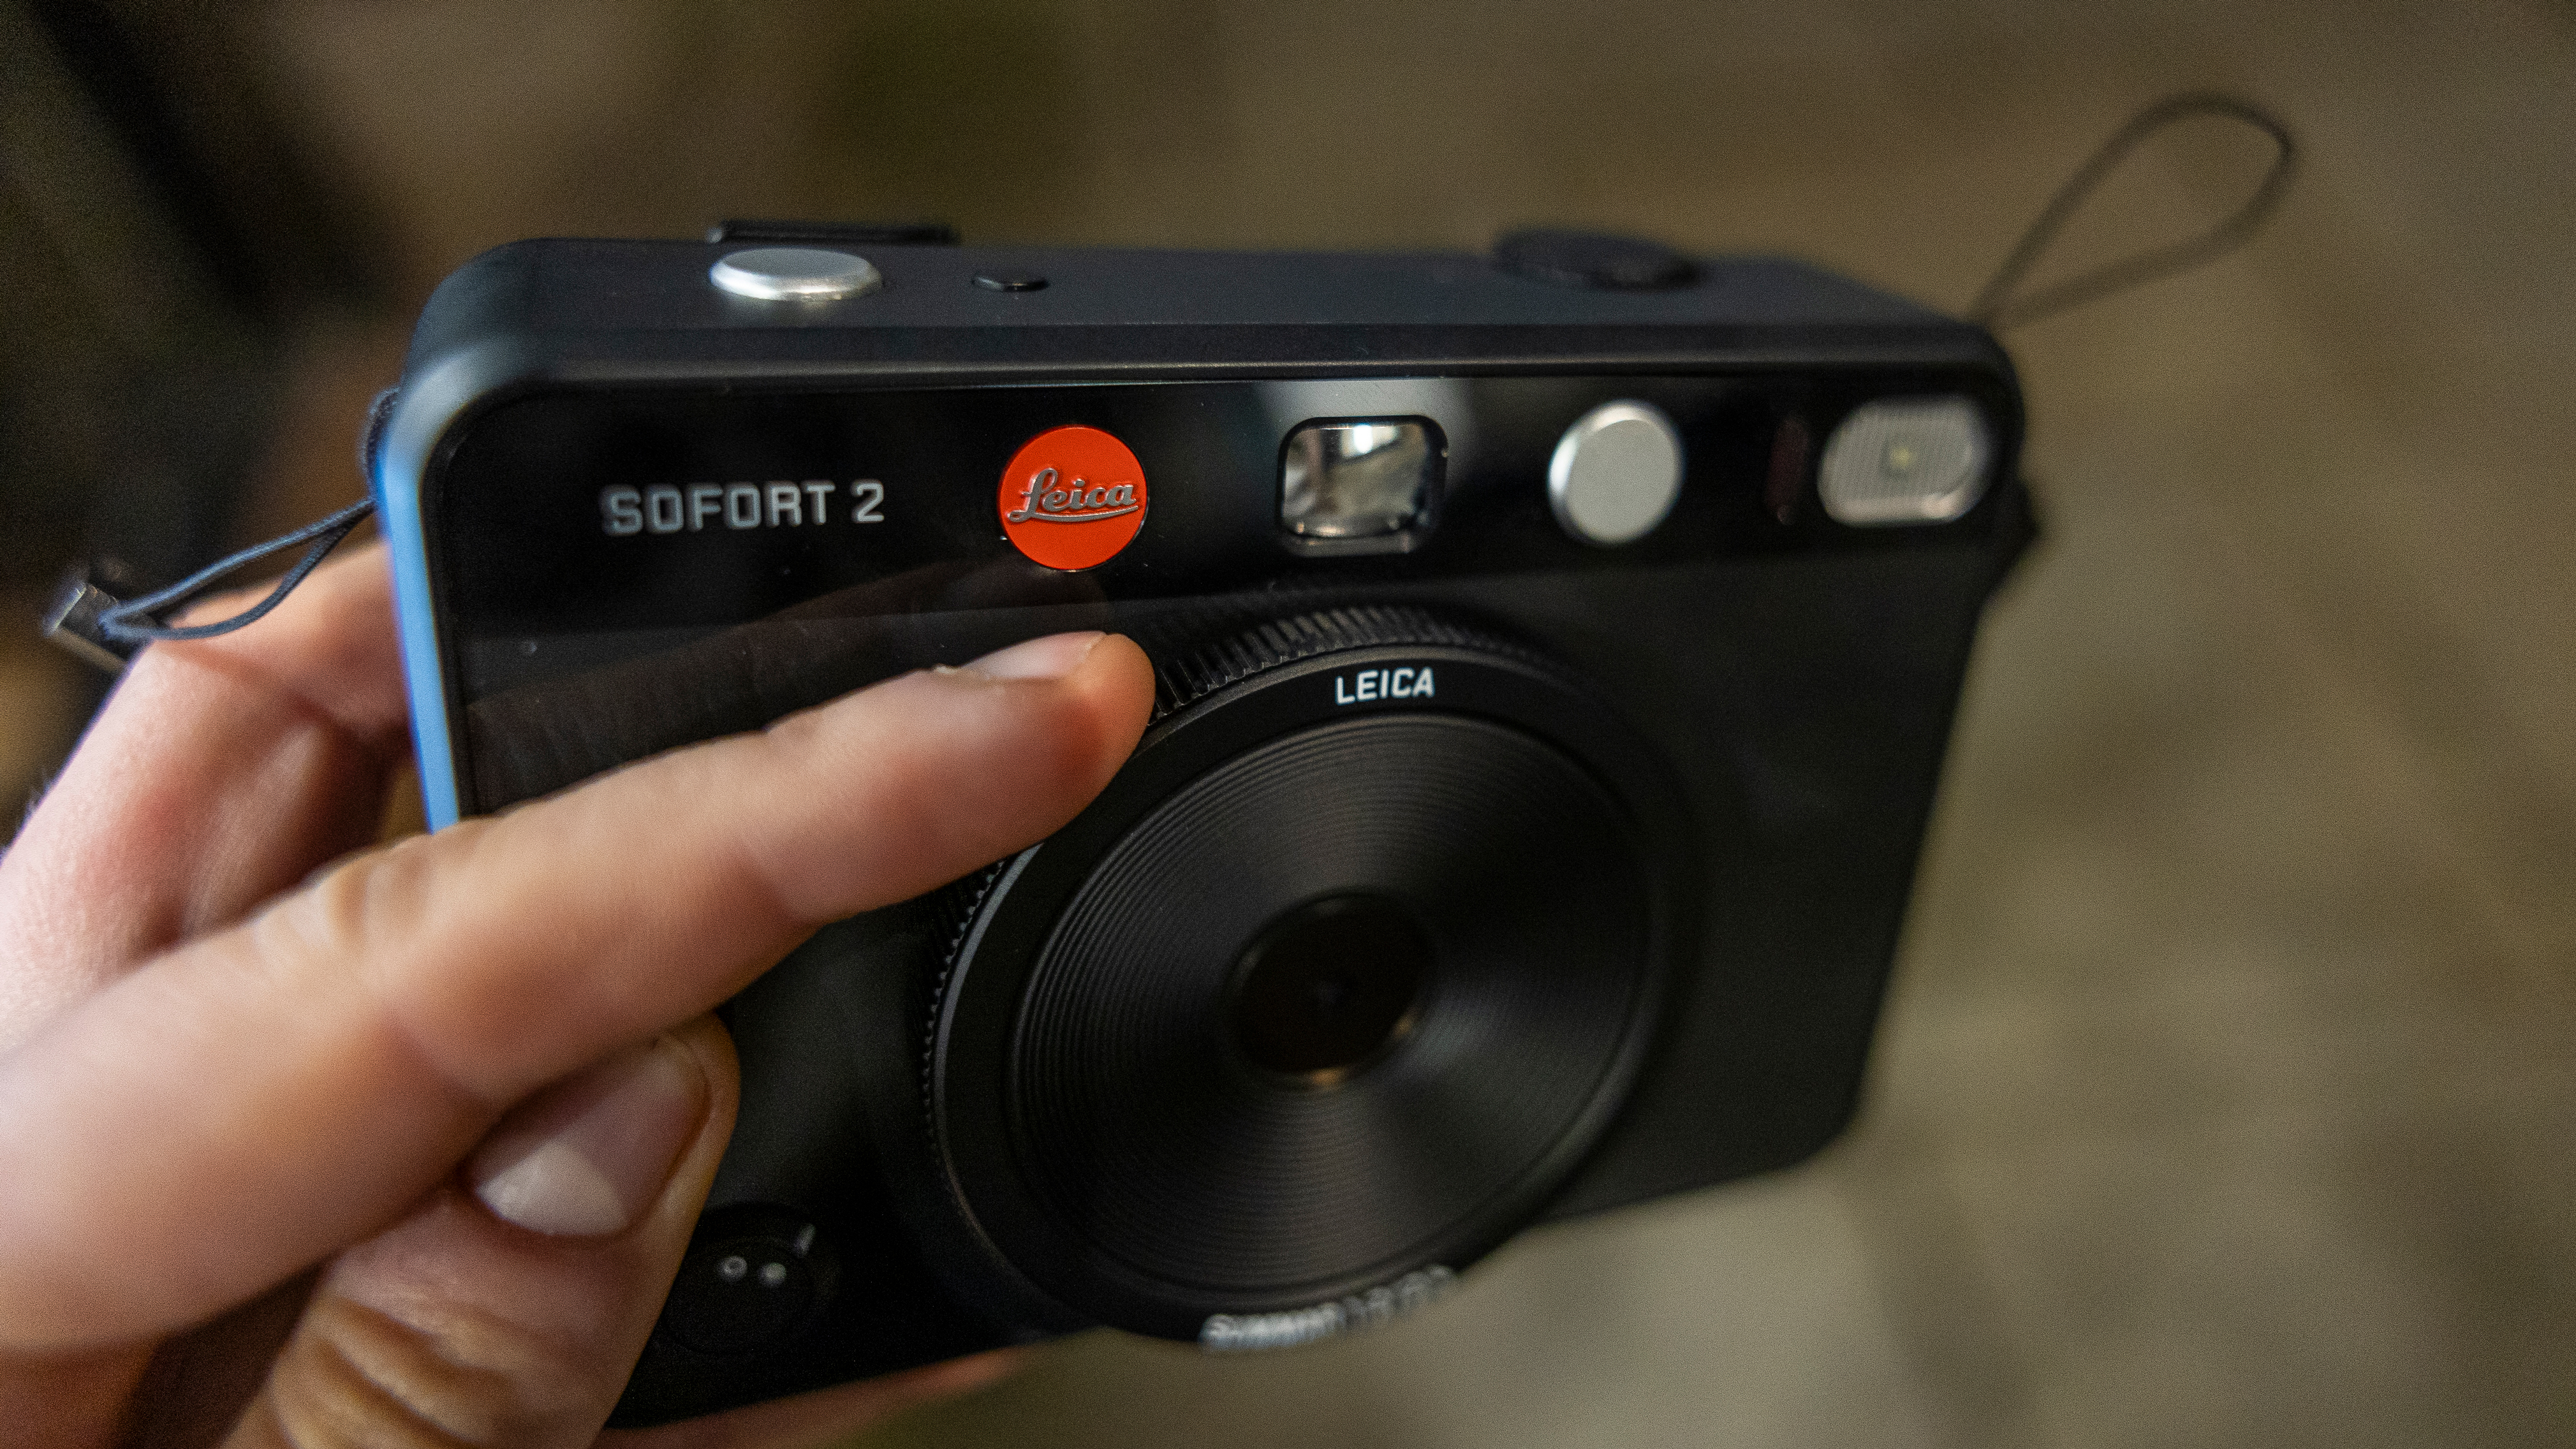 The Leica Sofort 2 lens being twisted to change filters